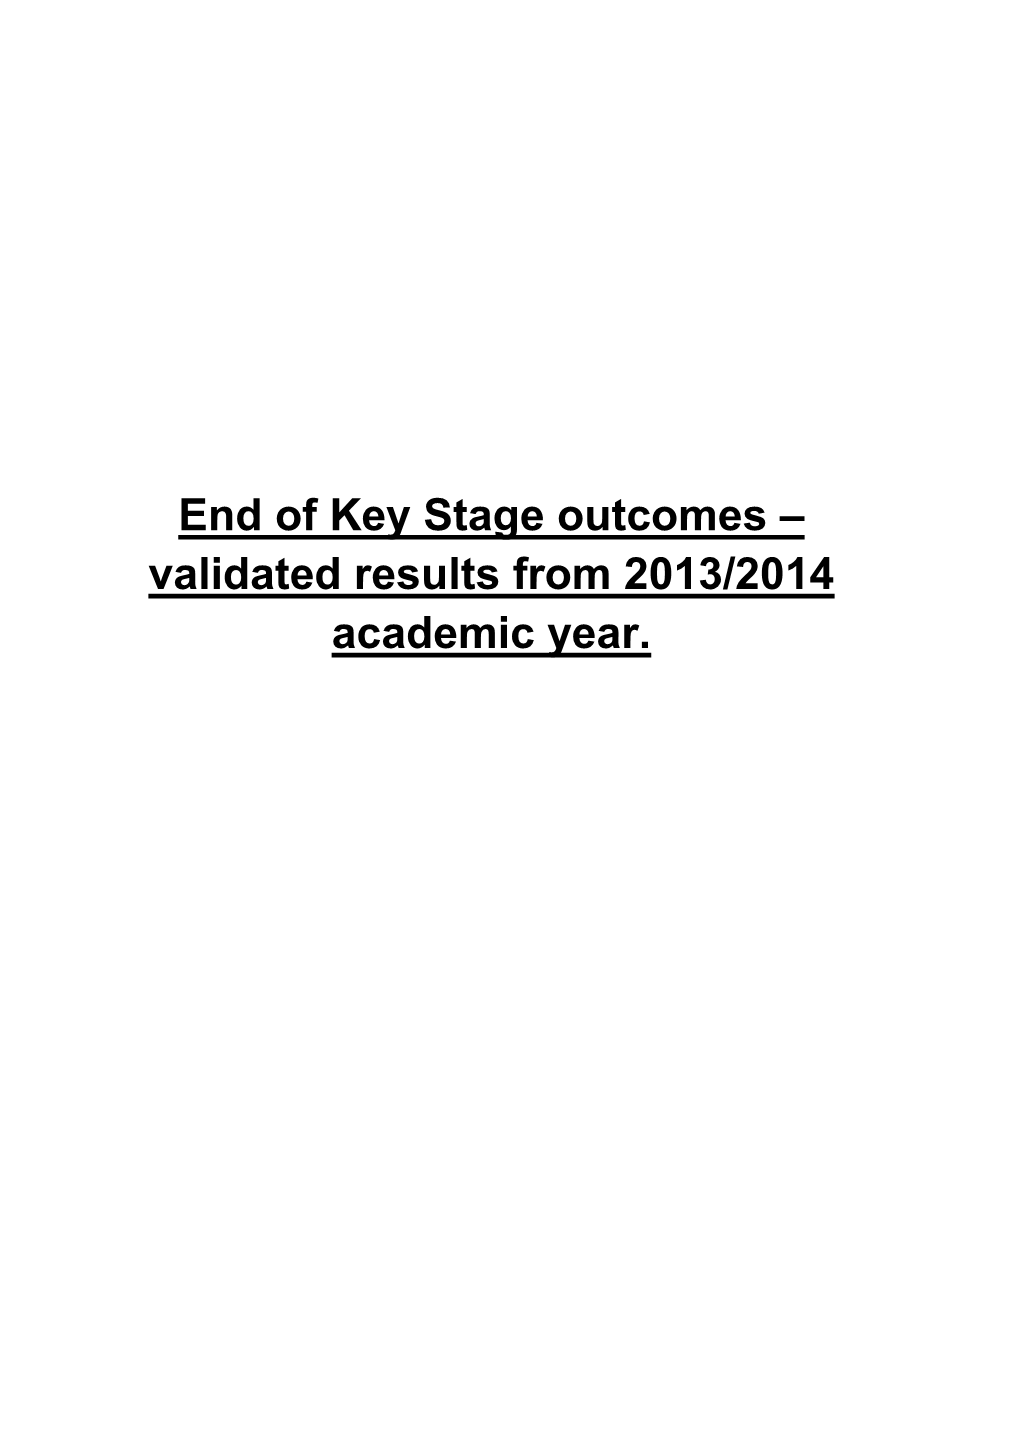 End of Key Stage Outcomes – Validated Results from 2013/2014 Academic Year